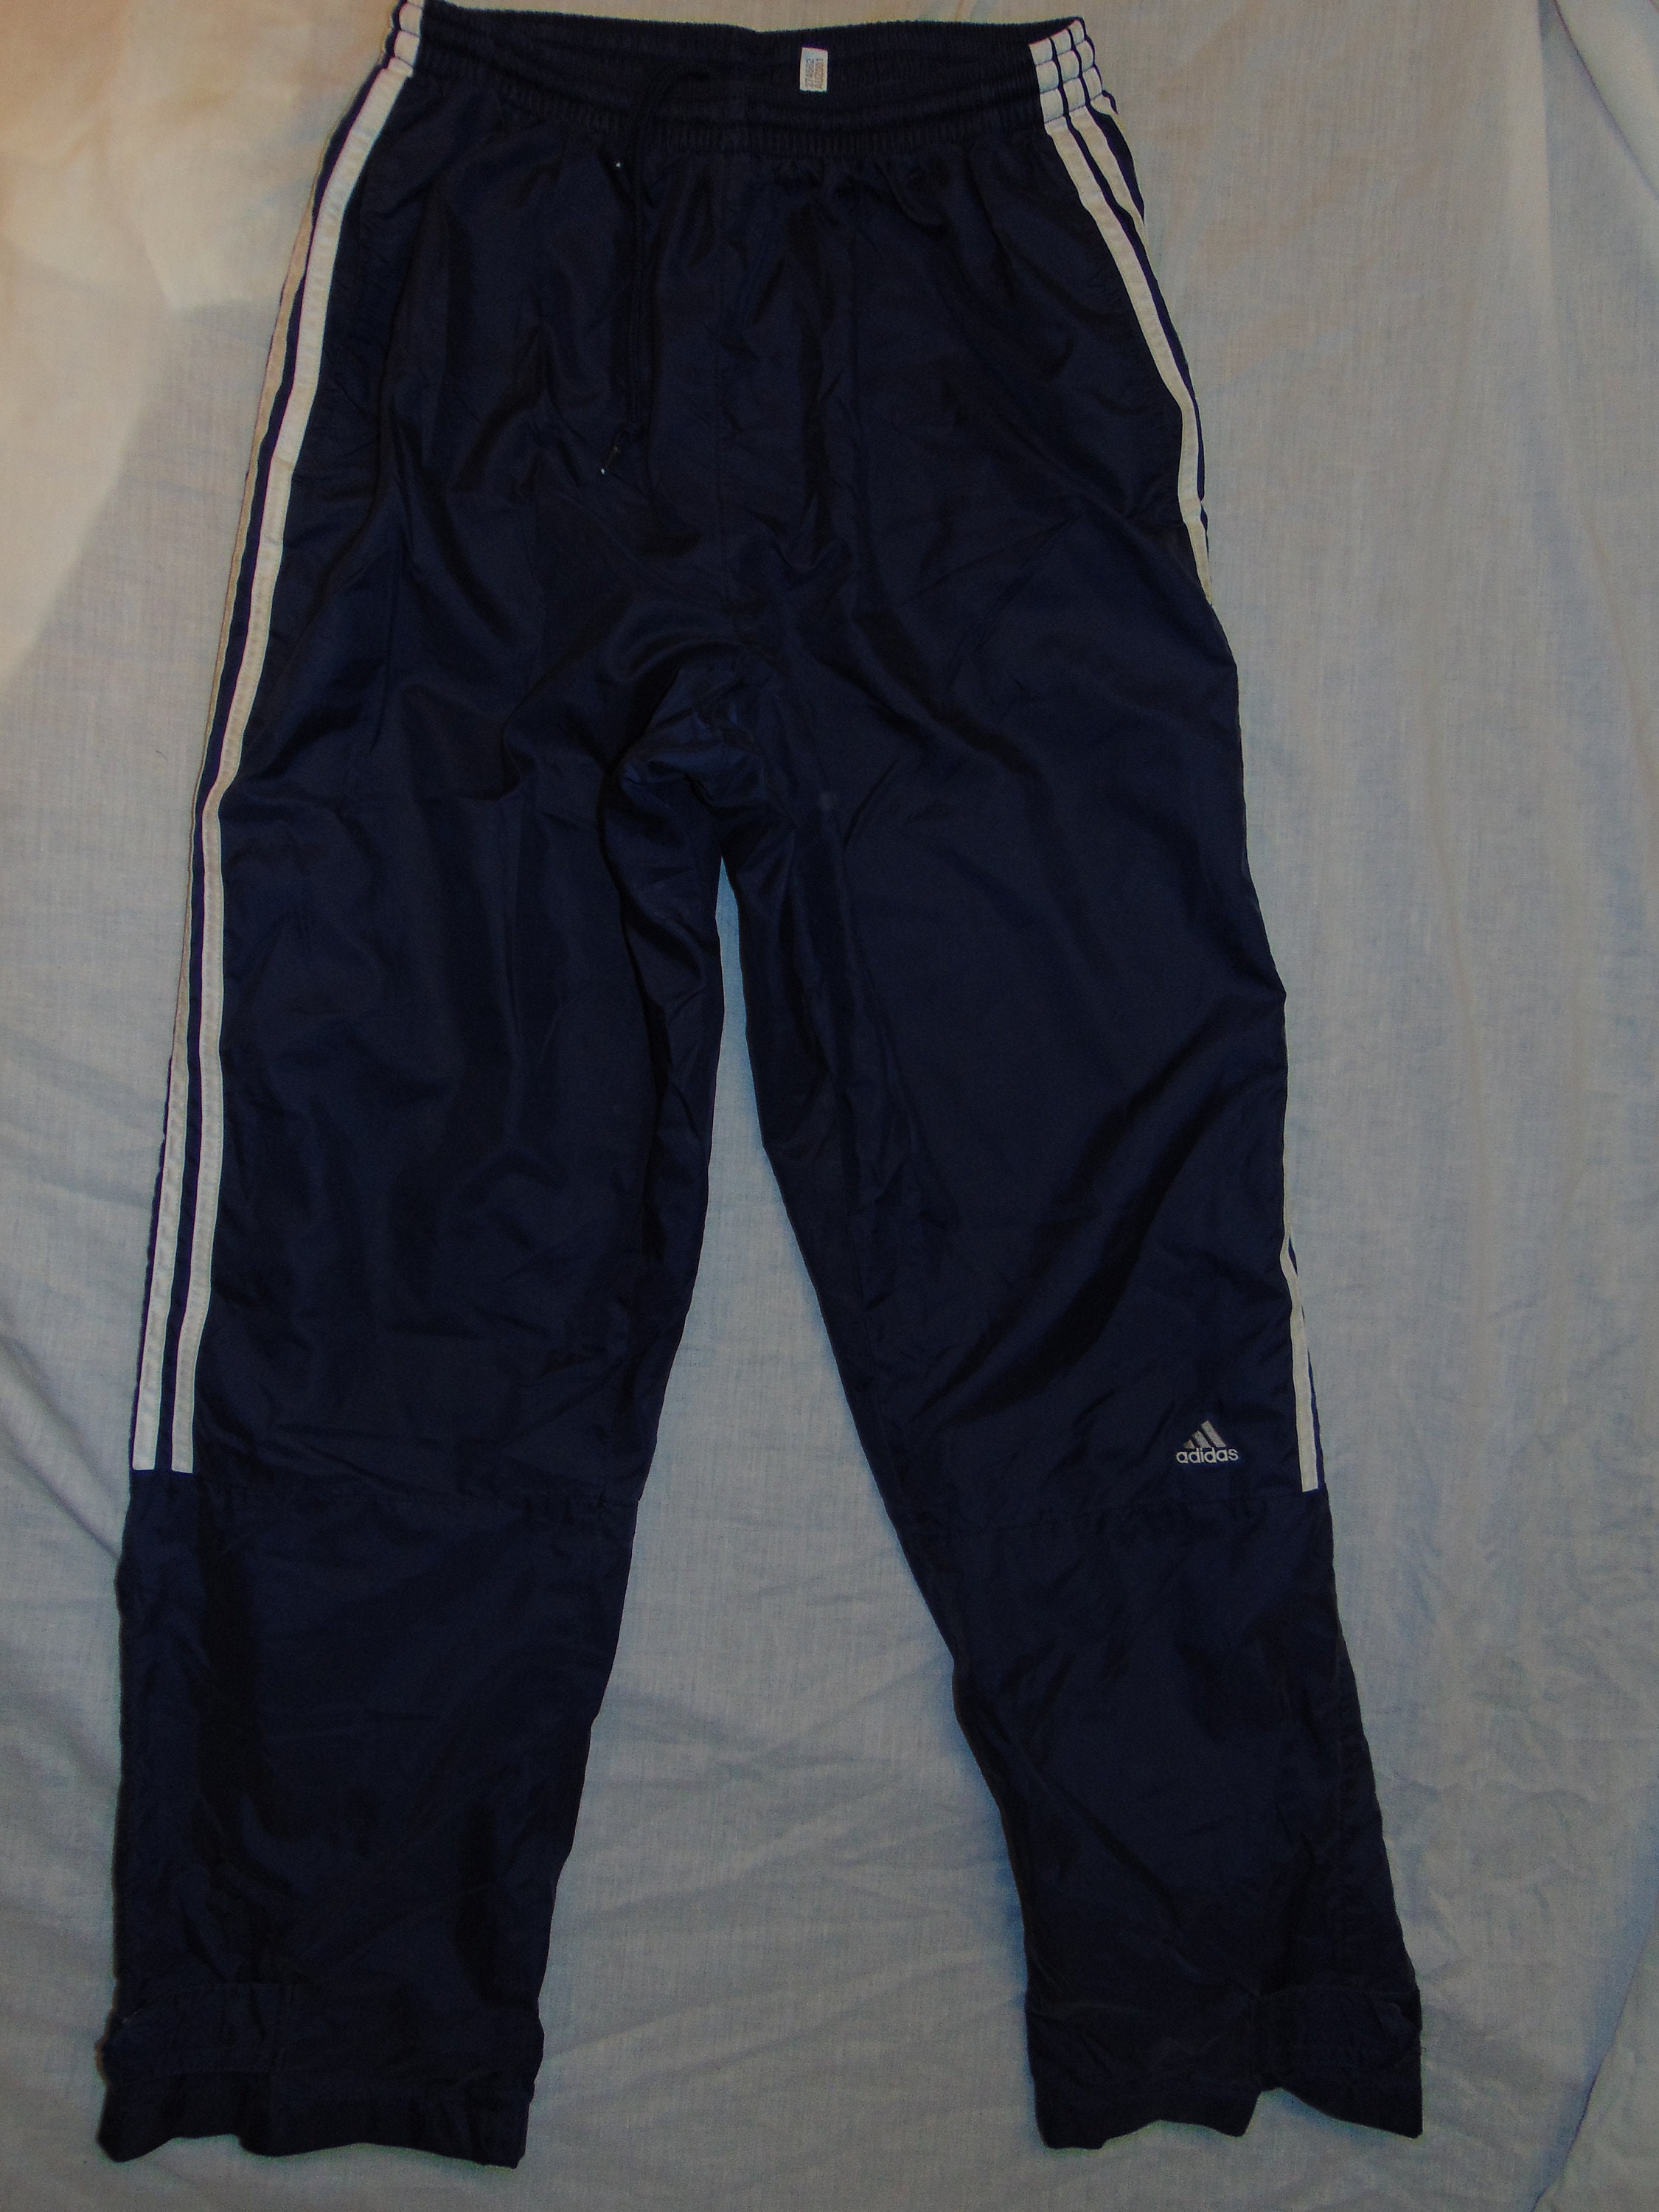 2000s navy Adidas sample track pants, retroiscooler